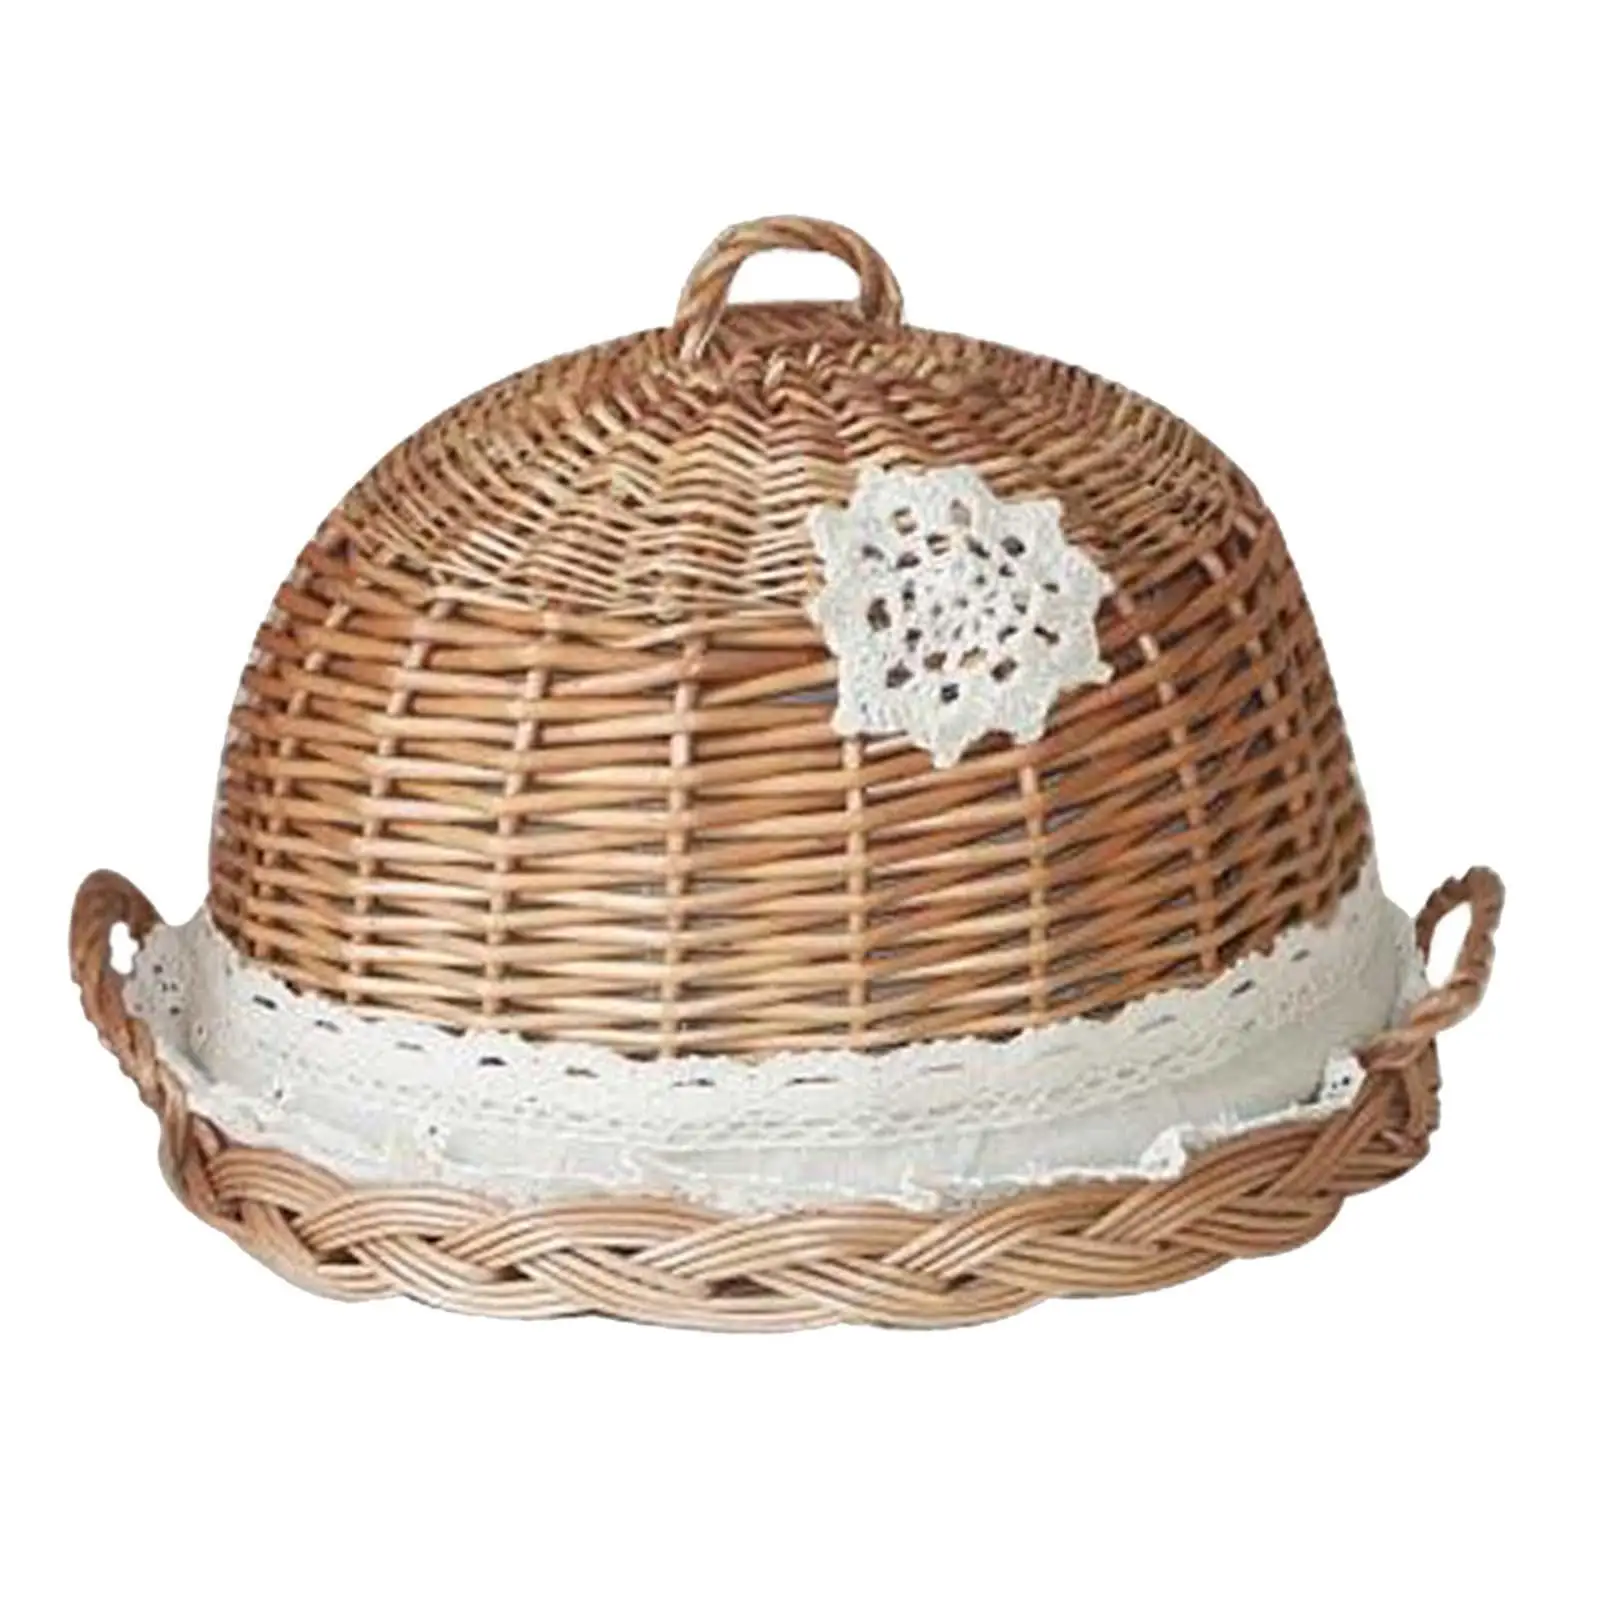 Food Dome Lid and Serving Tray Rattan Wicker Woven Brown 11.8inchx7.9inch